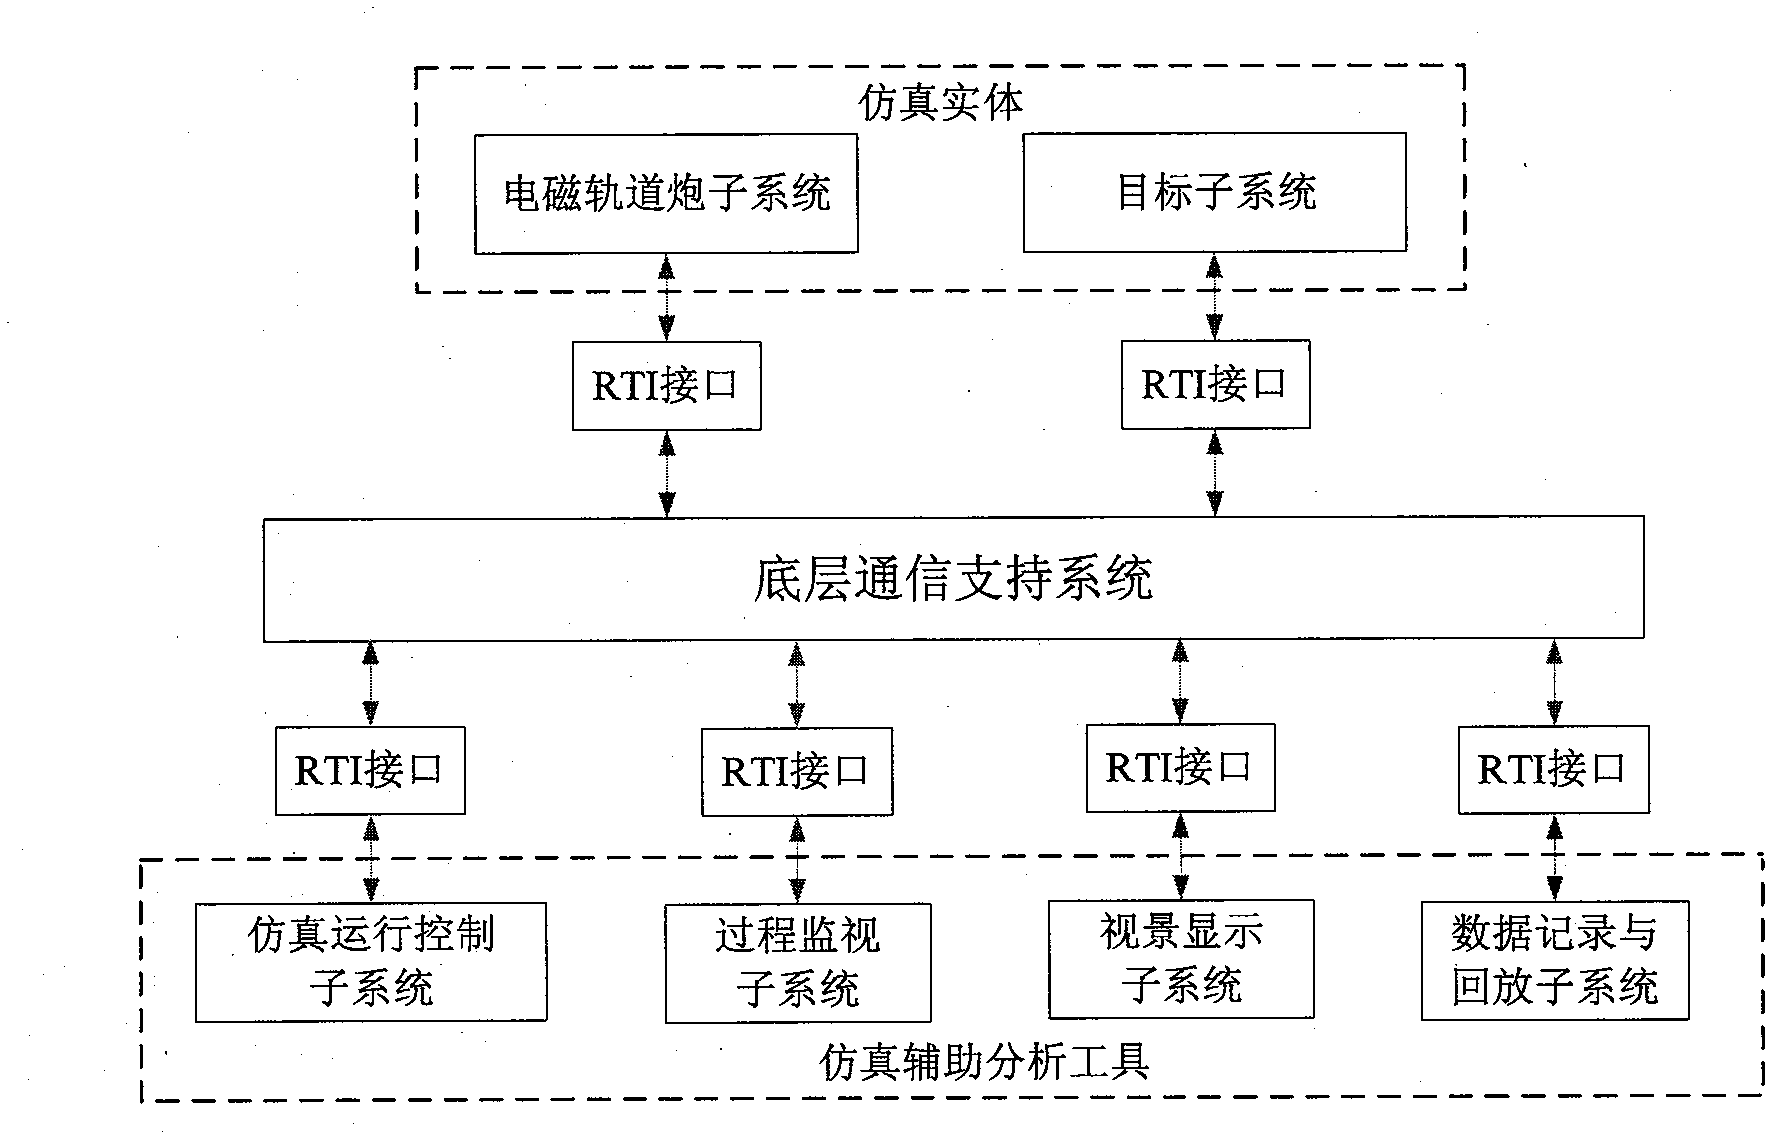 Electromagnetic rail gun simulation system based on high level architecture (HLA) and realization method thereof